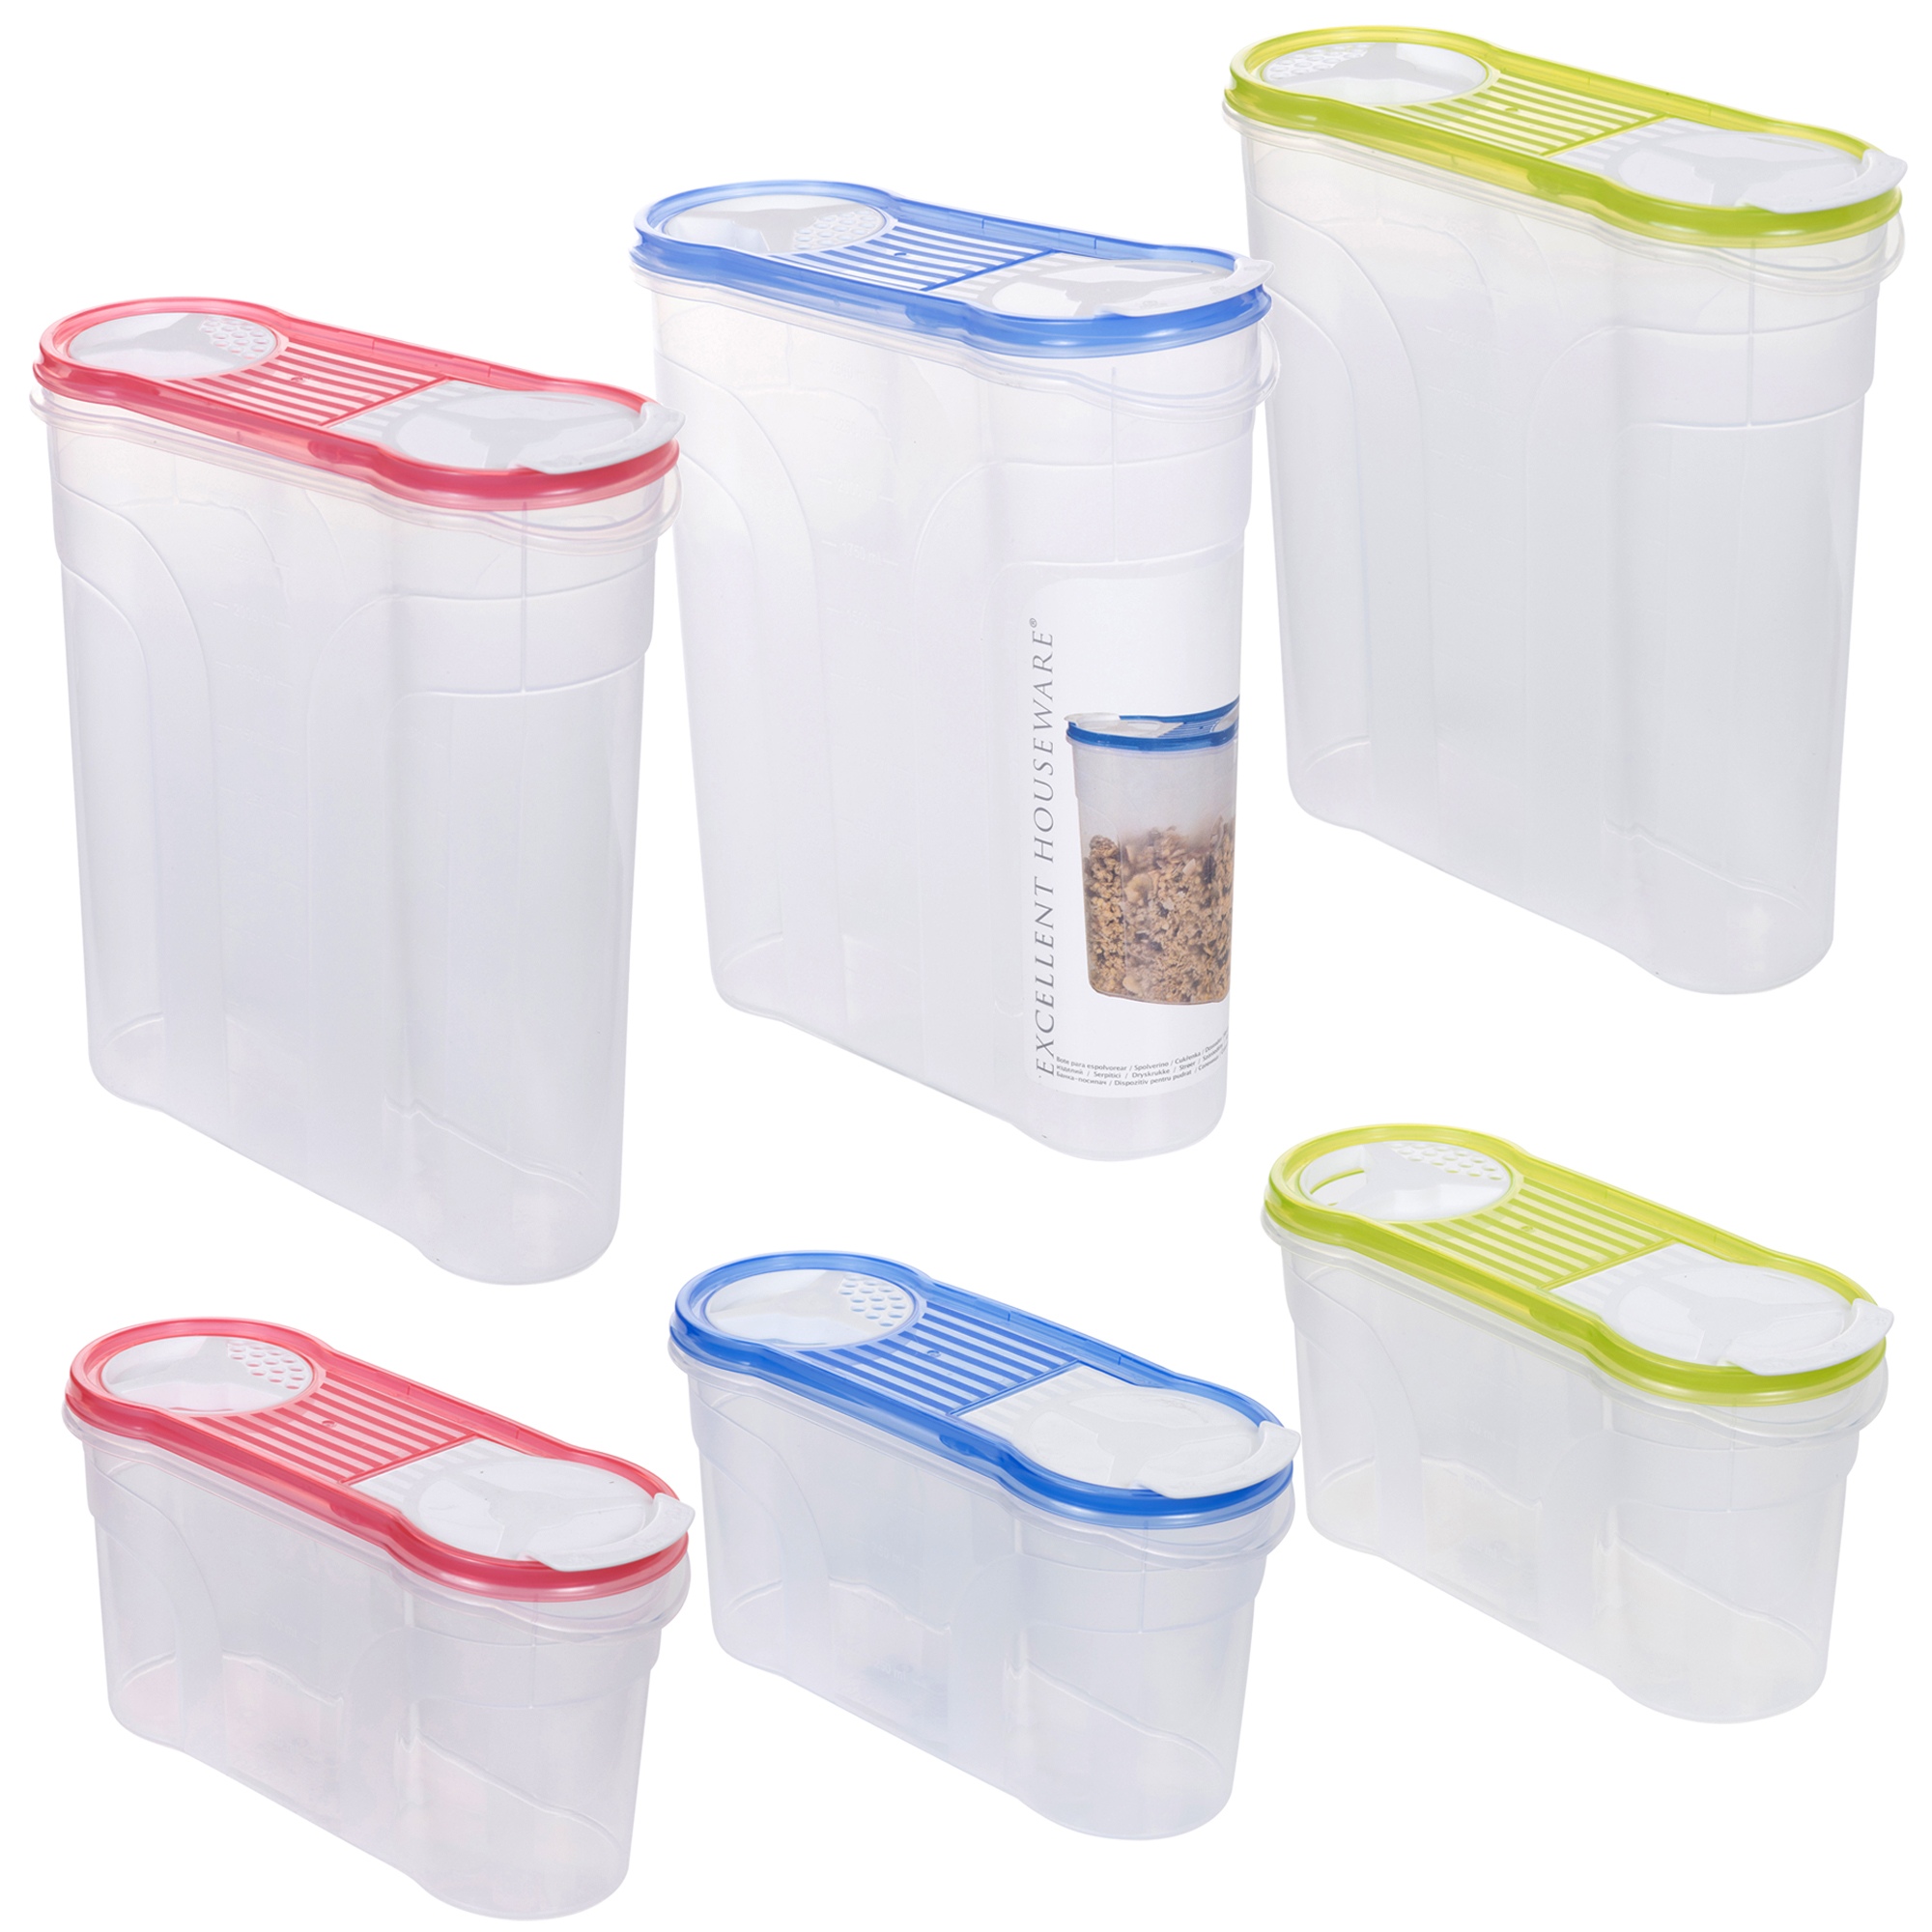 Large Food Storage Container Containers Dry Rice Food Dispenser W/ Lids E0VZ